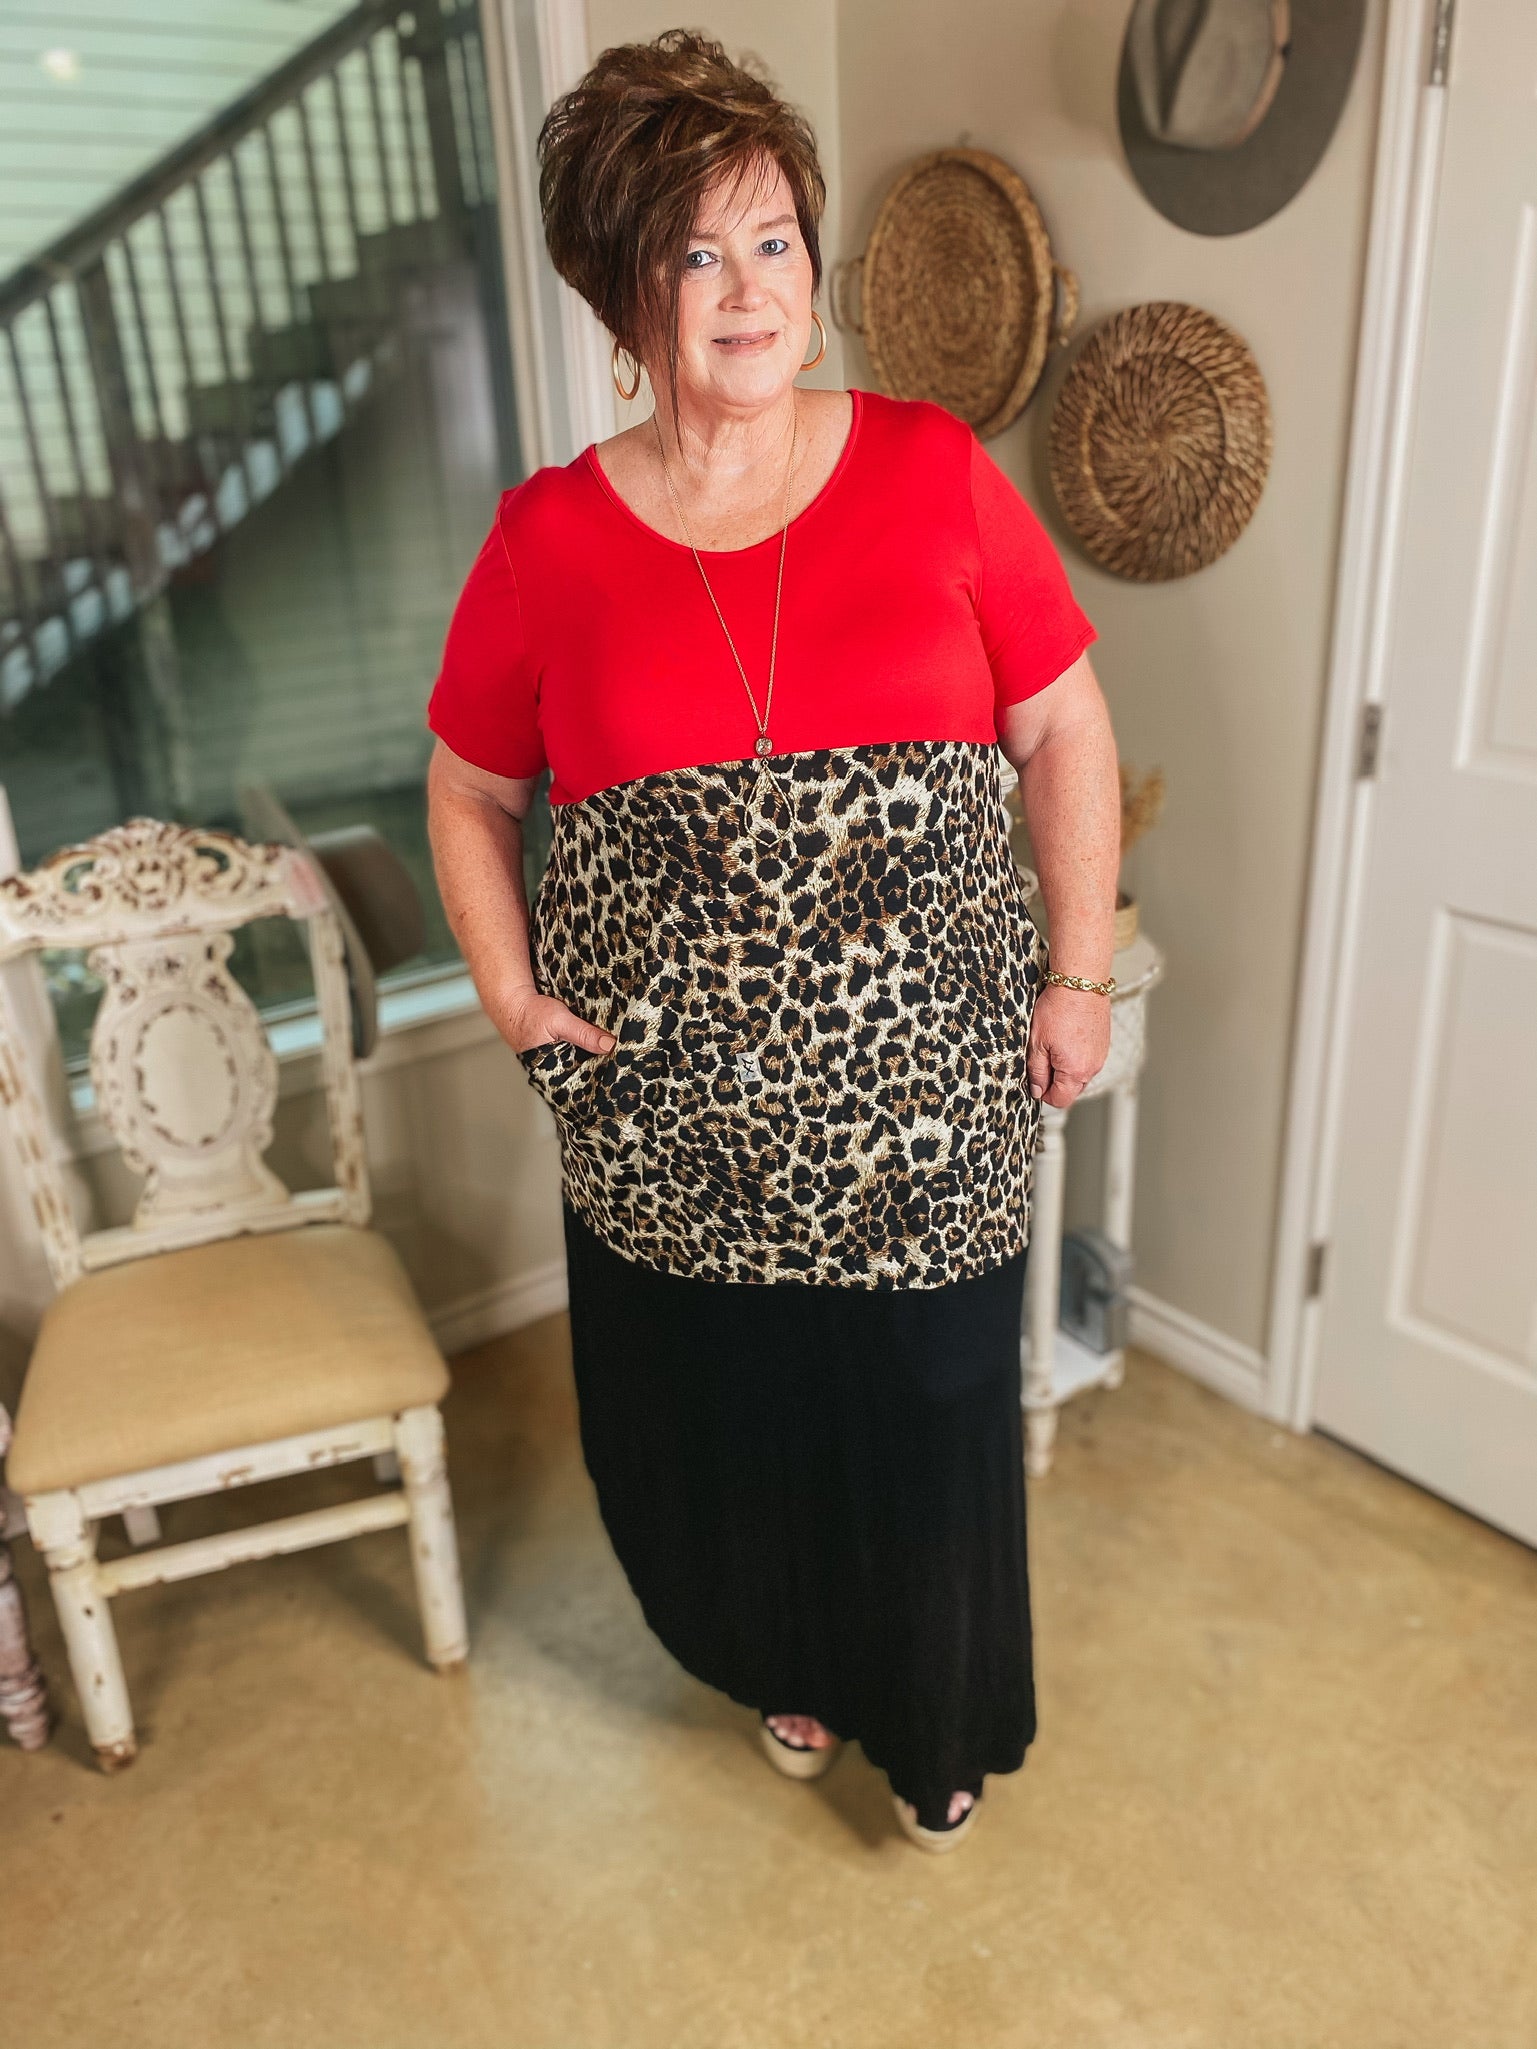 Last Chance Size Small & Medium | Change of Plans Leopard Print Color Block Maxi Dress in Red - Giddy Up Glamour Boutique